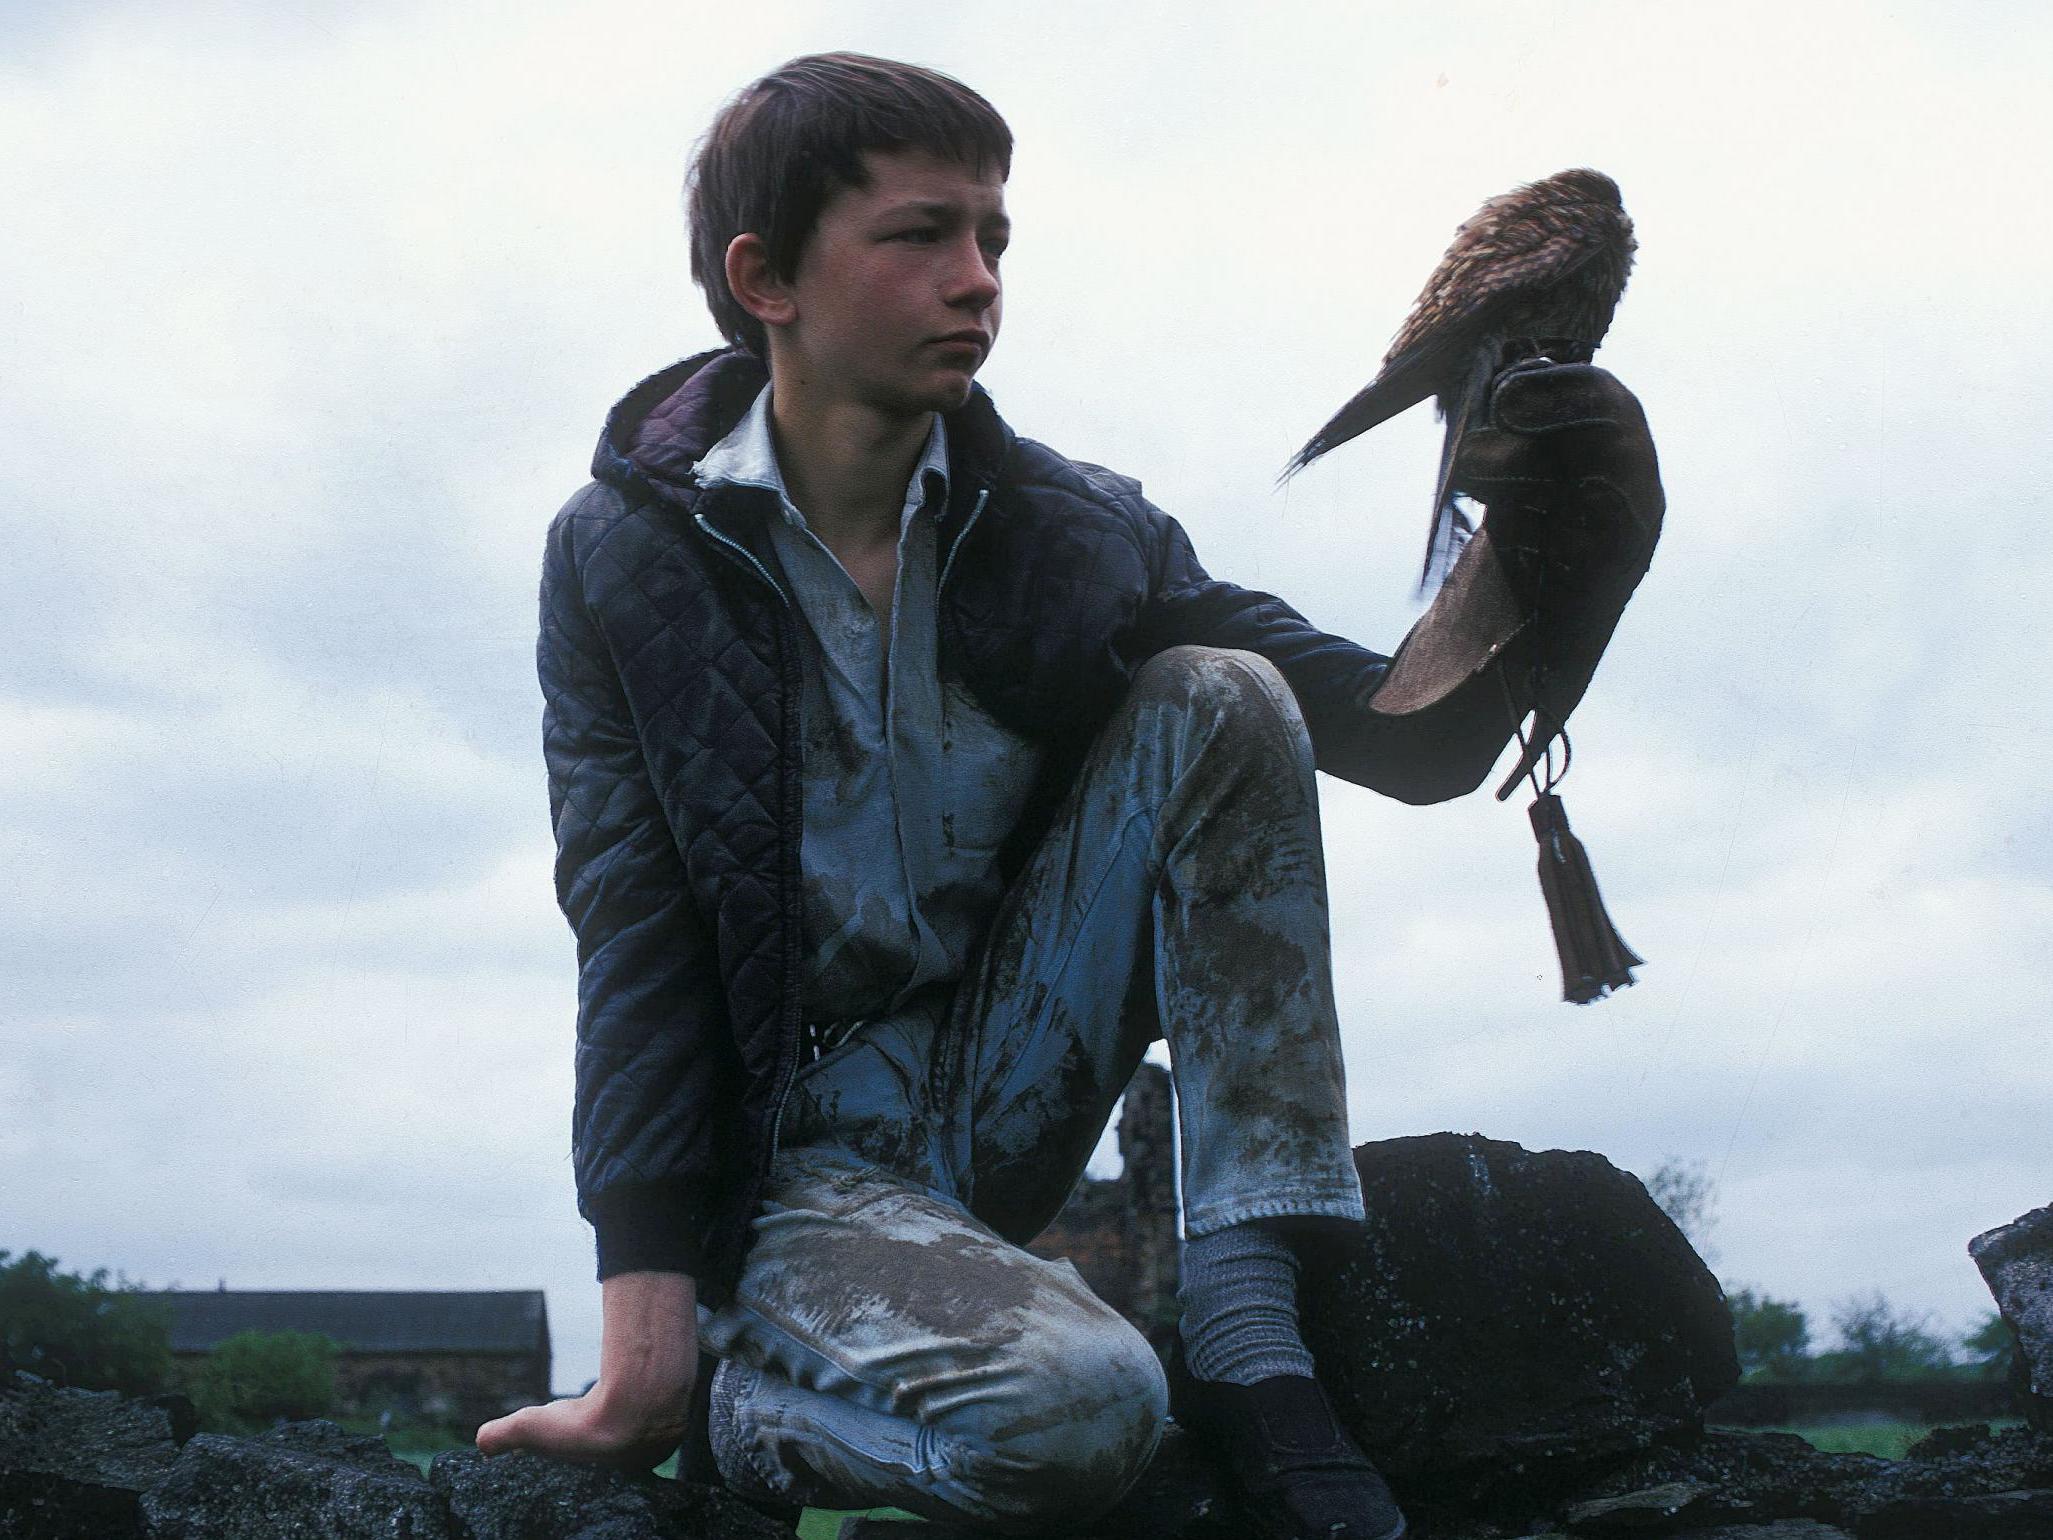 David Bradley in ‘Kes’, widely regarded as one of the greatest British films of all time